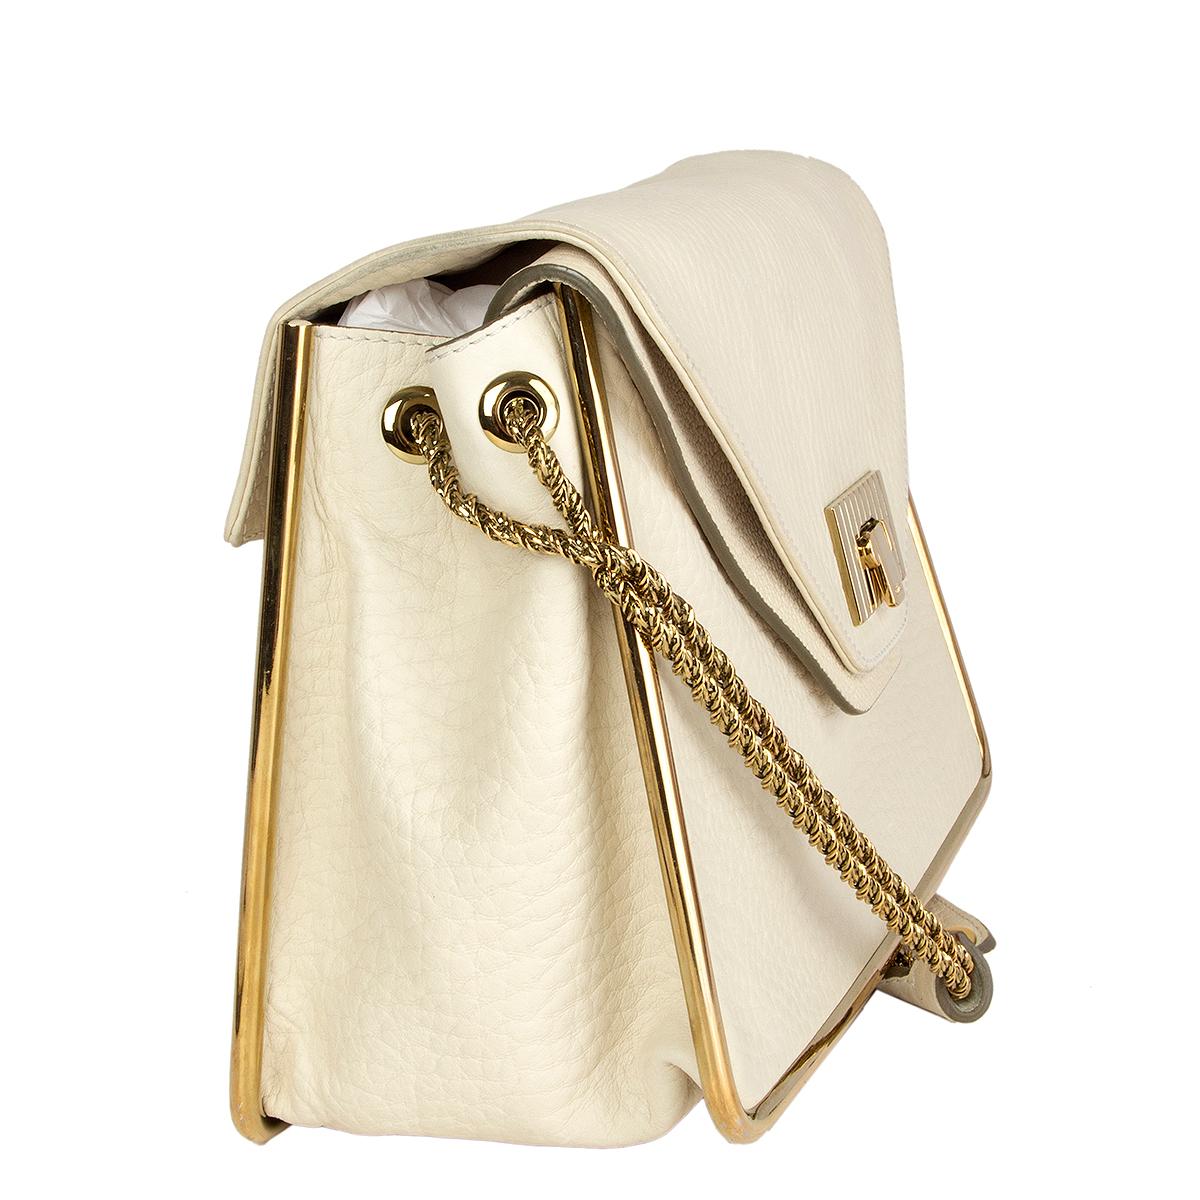 Chloé 'Sally Medium' shoulder bag in Milk (cream) grained calfskin featuring gold-tone hardware. Opens with a turn lock and has highlighted borders in gold-tone hardware. Intertwined chain with a leather strap. Interior is divided in two